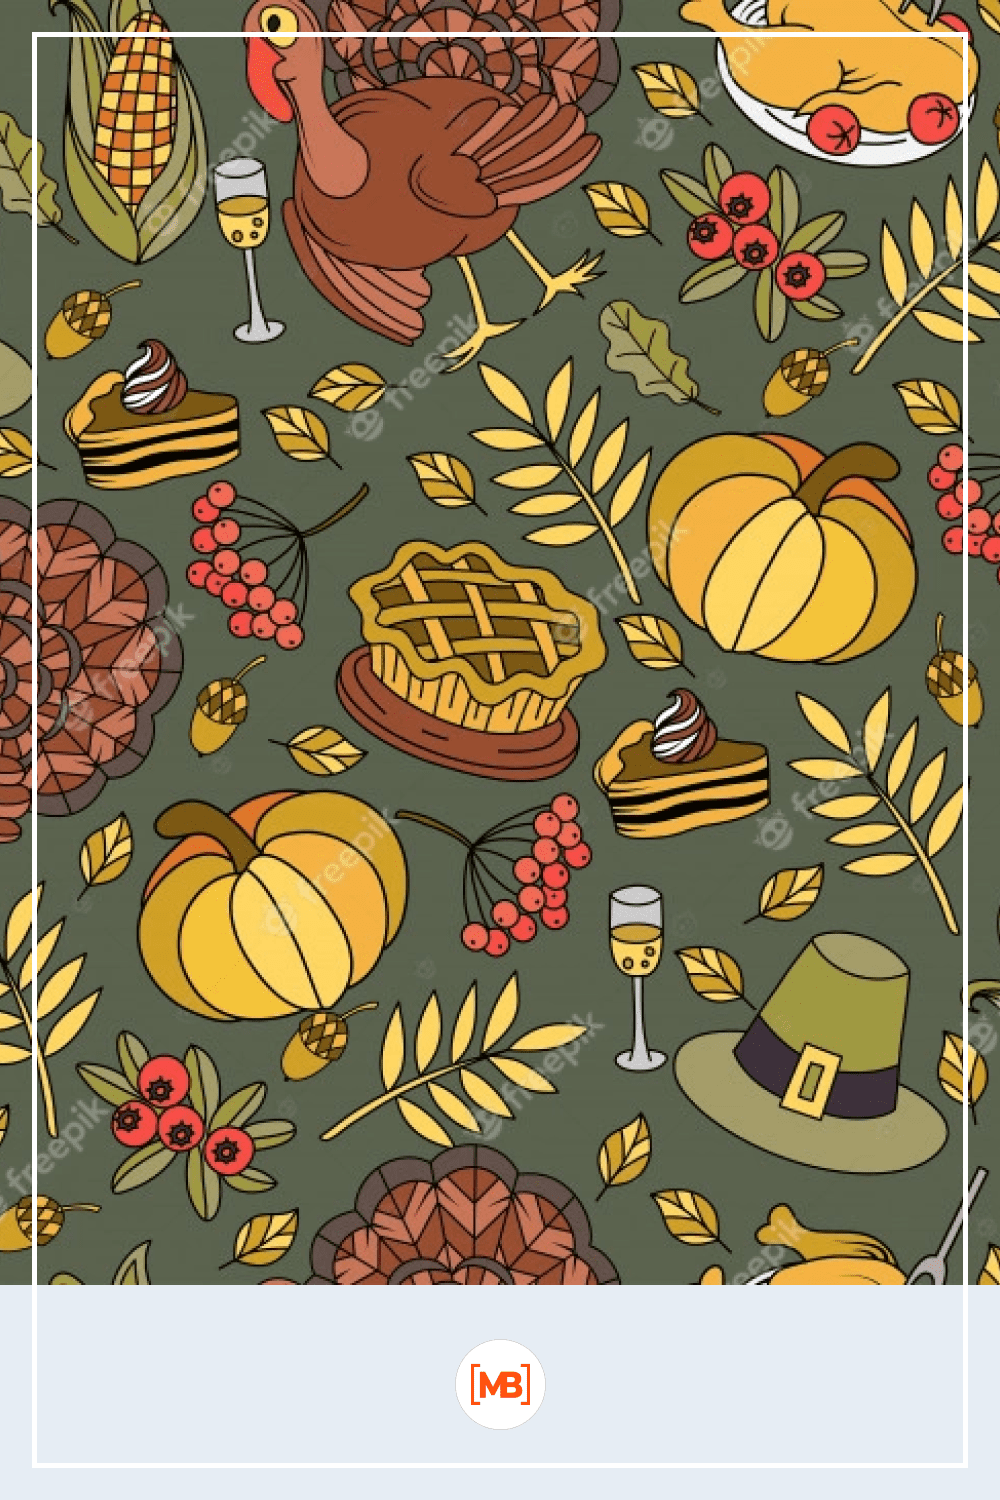 Happy Thanksgiving Background Image 2022: Free and Premium